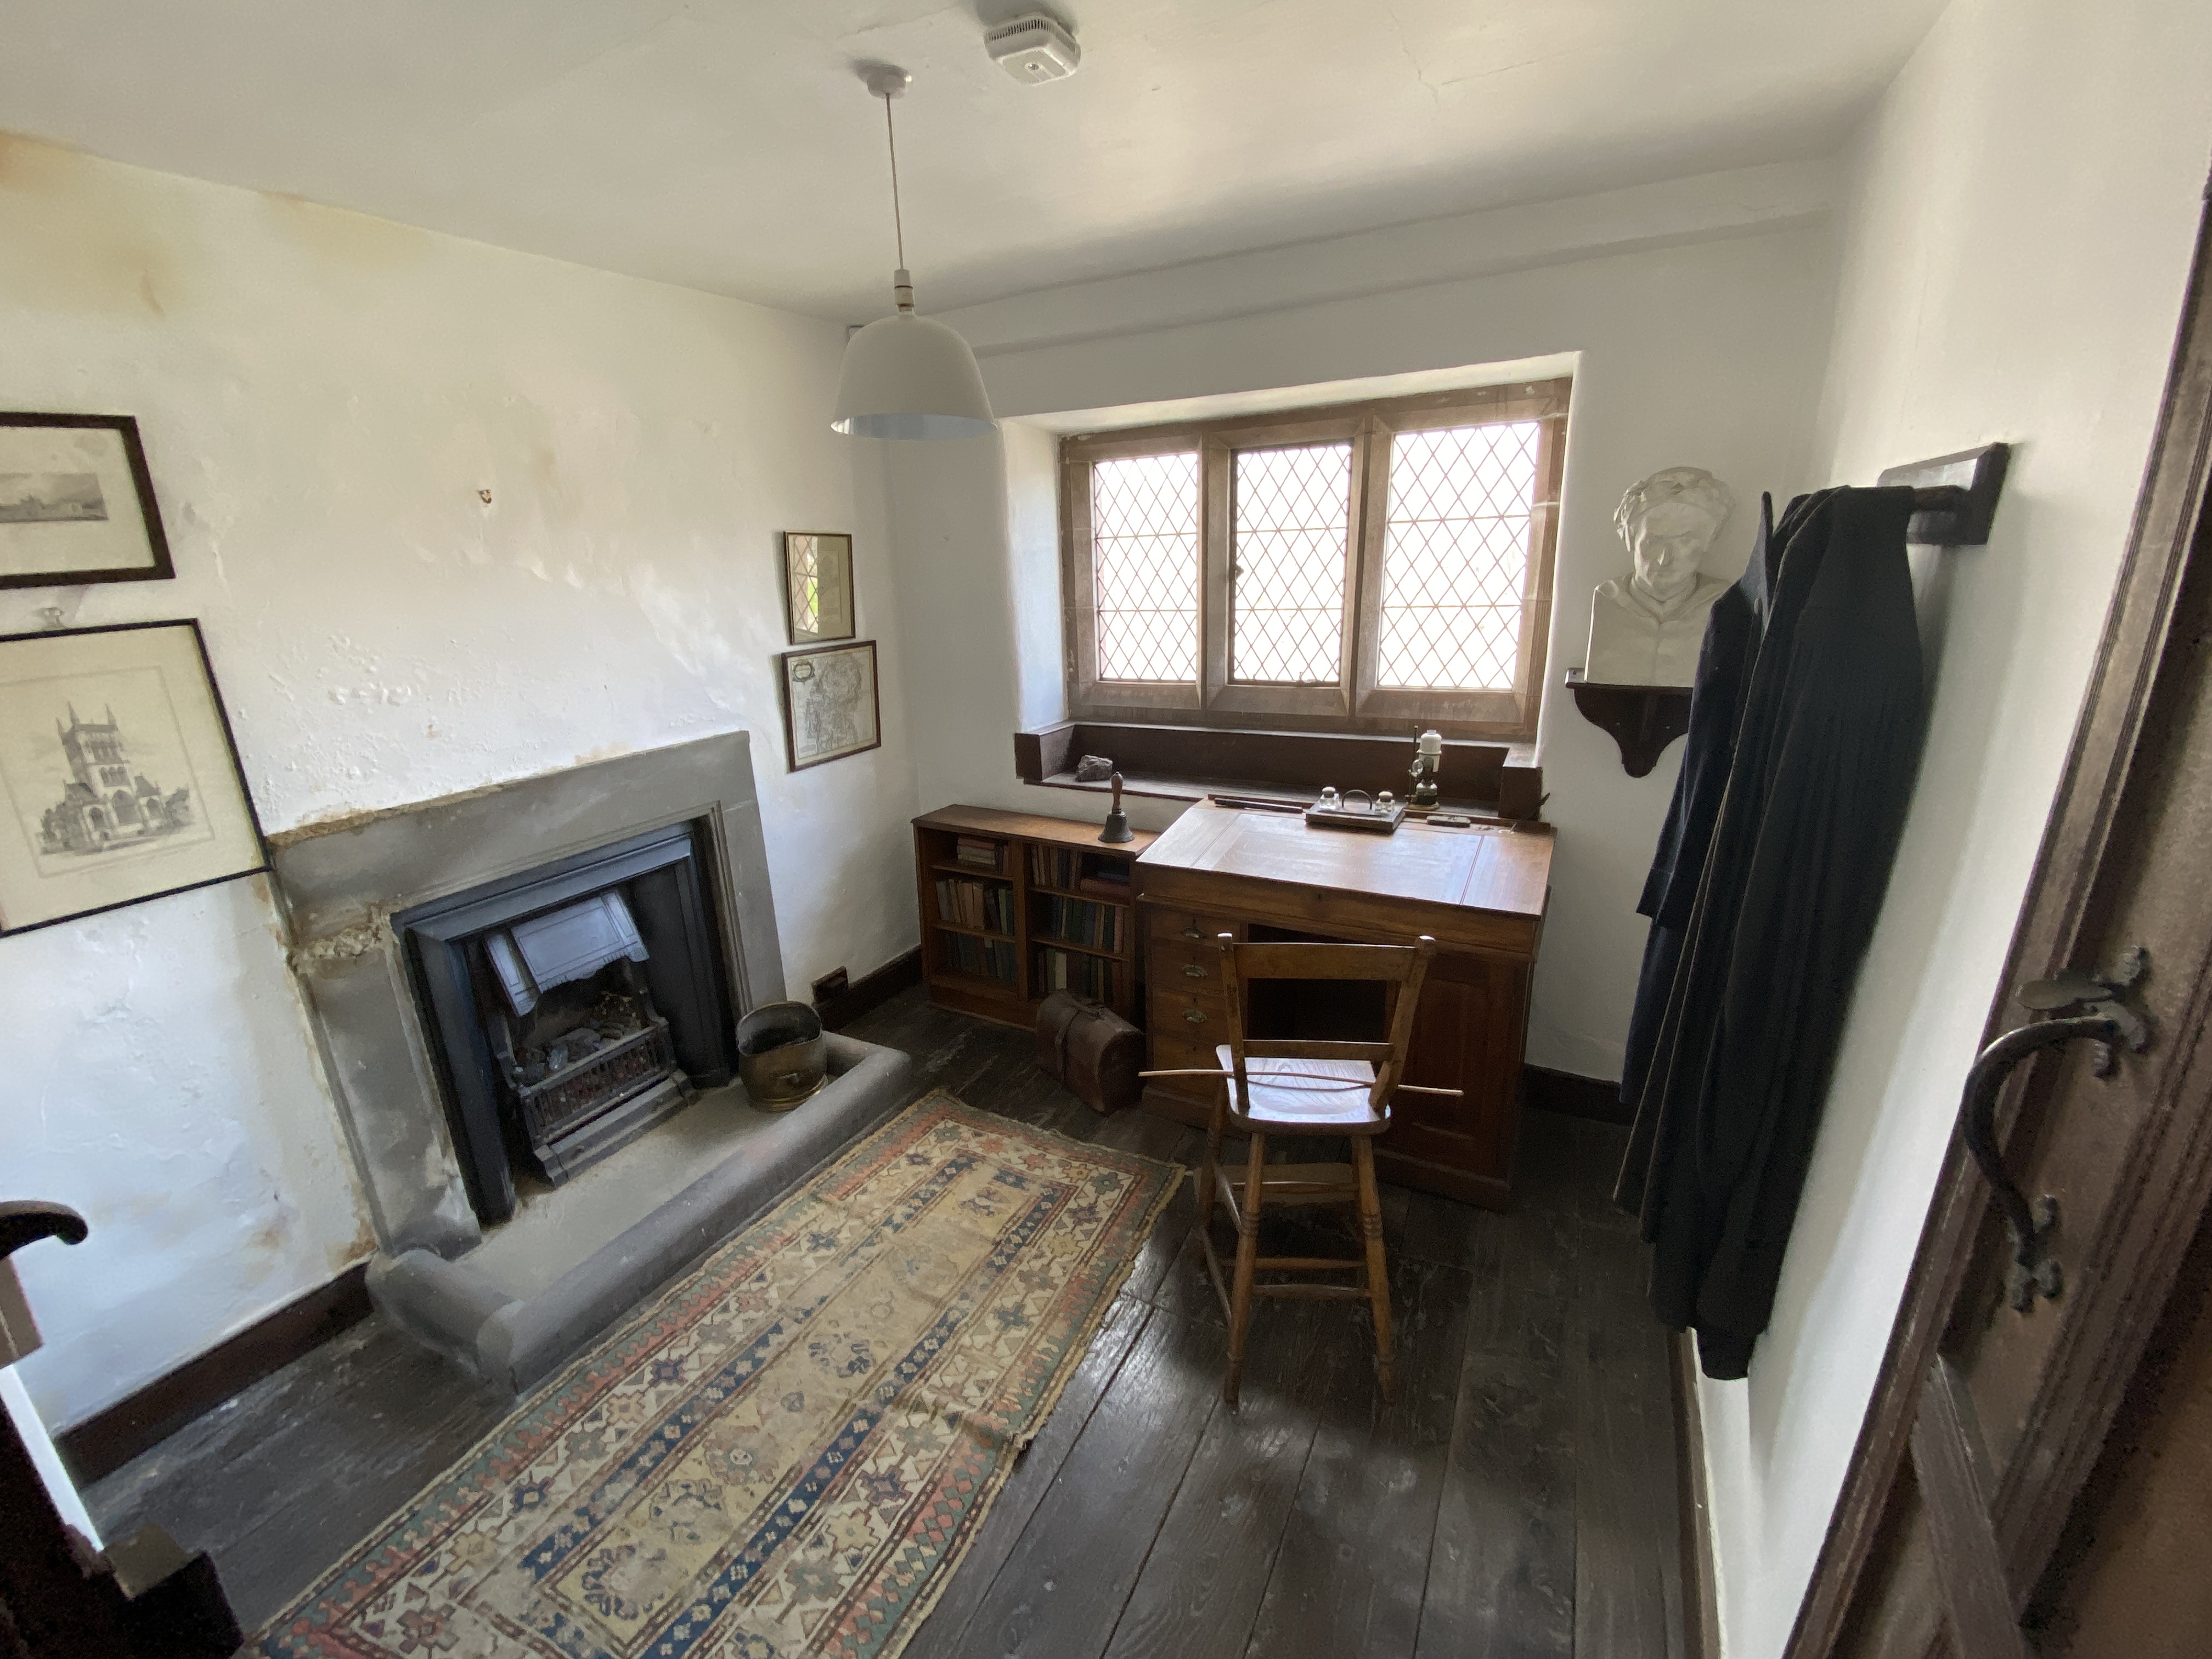 Photograph of the Headmaster's Study. A small room with white walls, a window, a wooden desk and bookcase. 